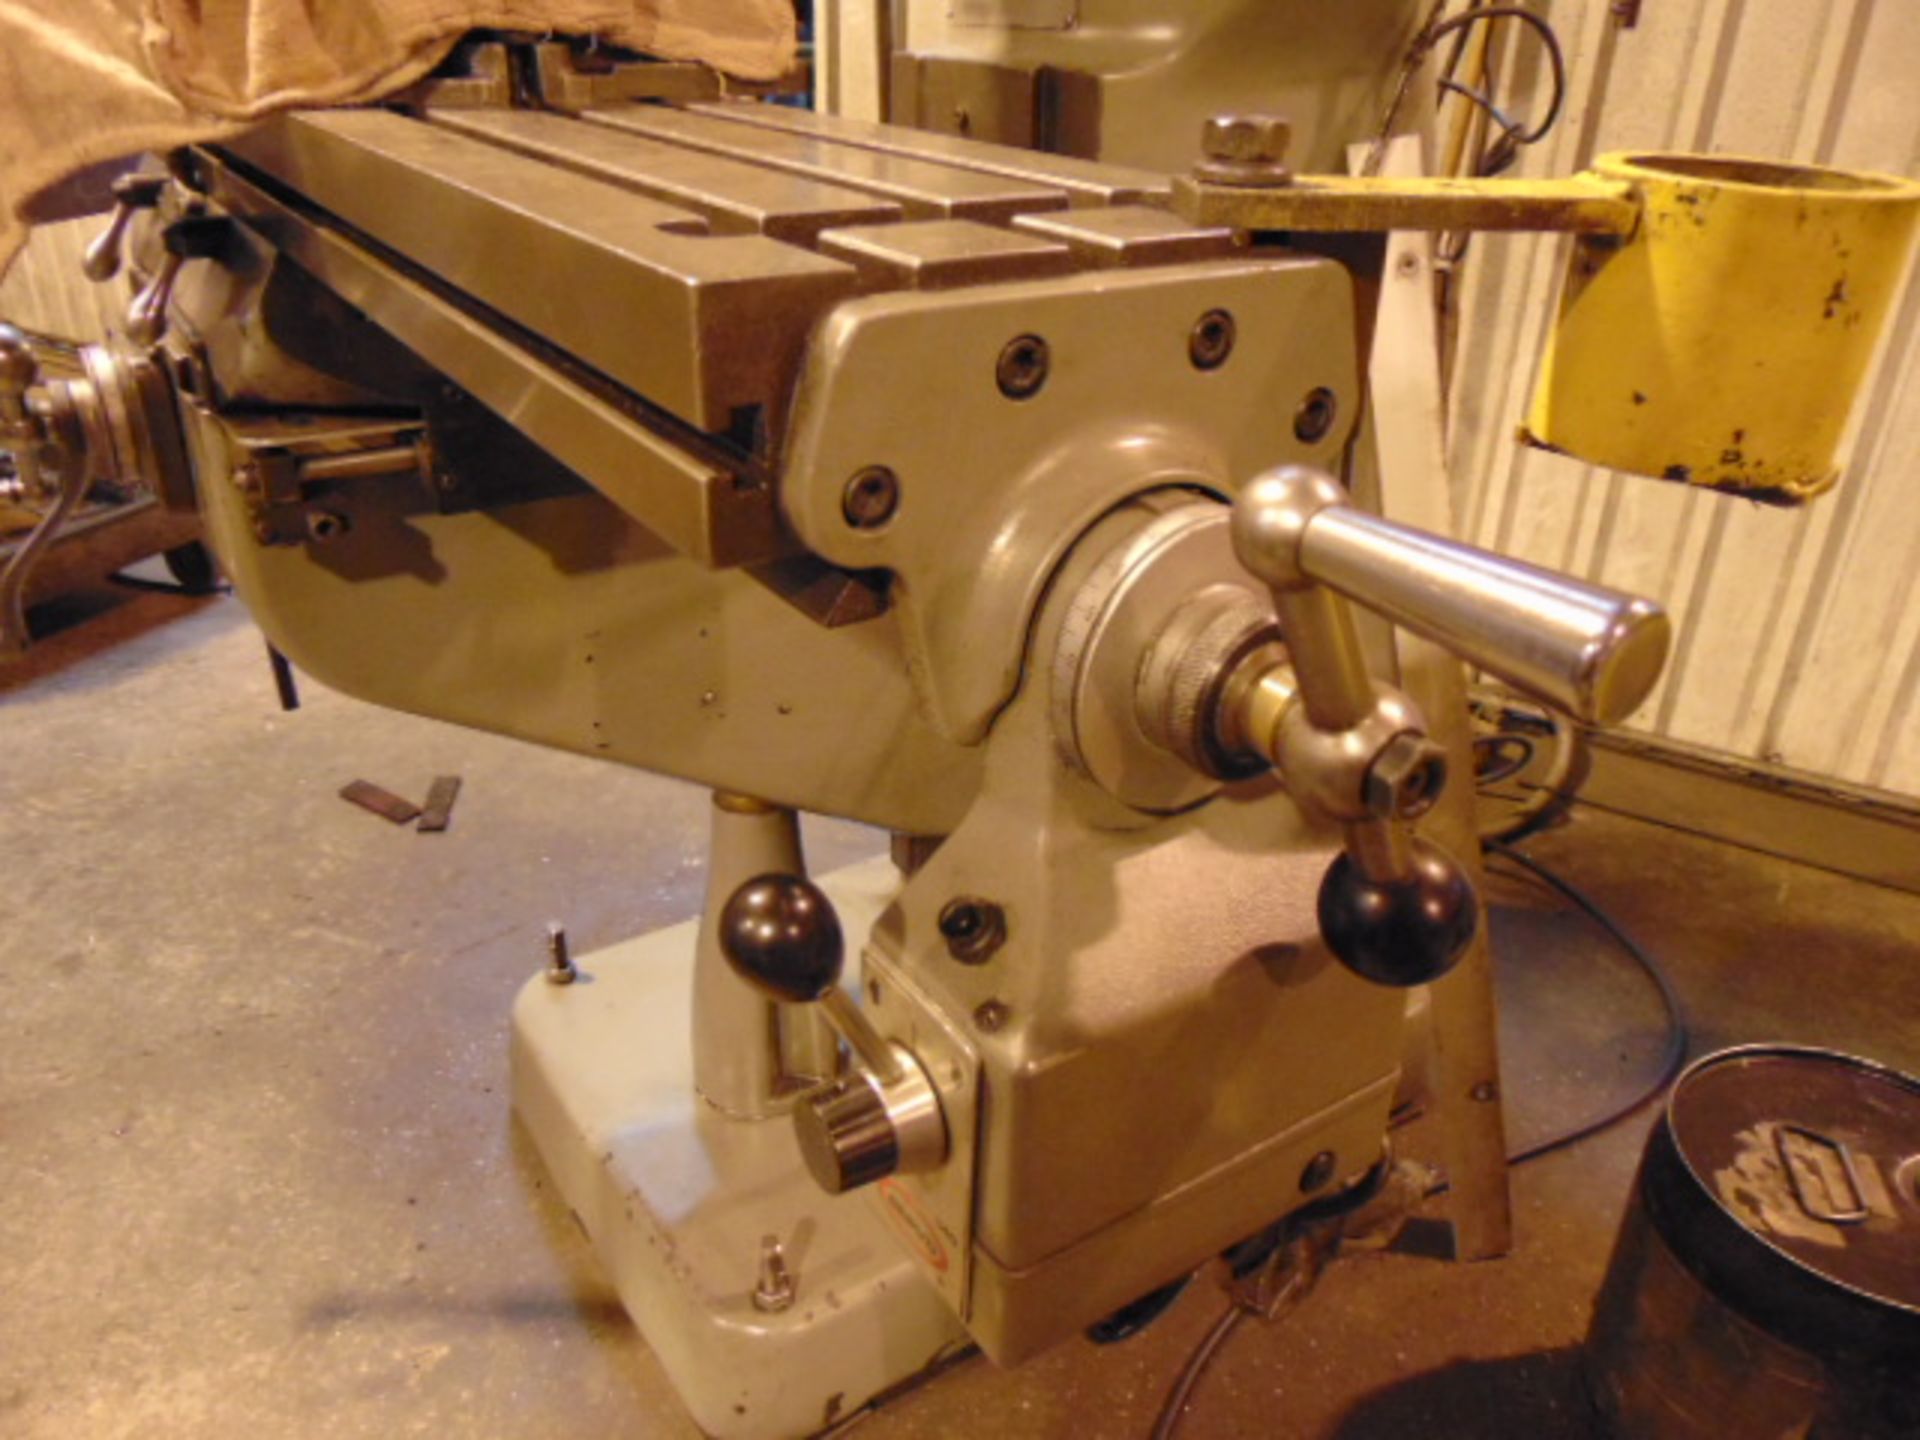 VERTICAL TURRET MILL, BRIDGEPORT J-HEAD, 9” x 42” table, 1 HP step pulley head, Newall 2-axis D.R. - Image 6 of 7